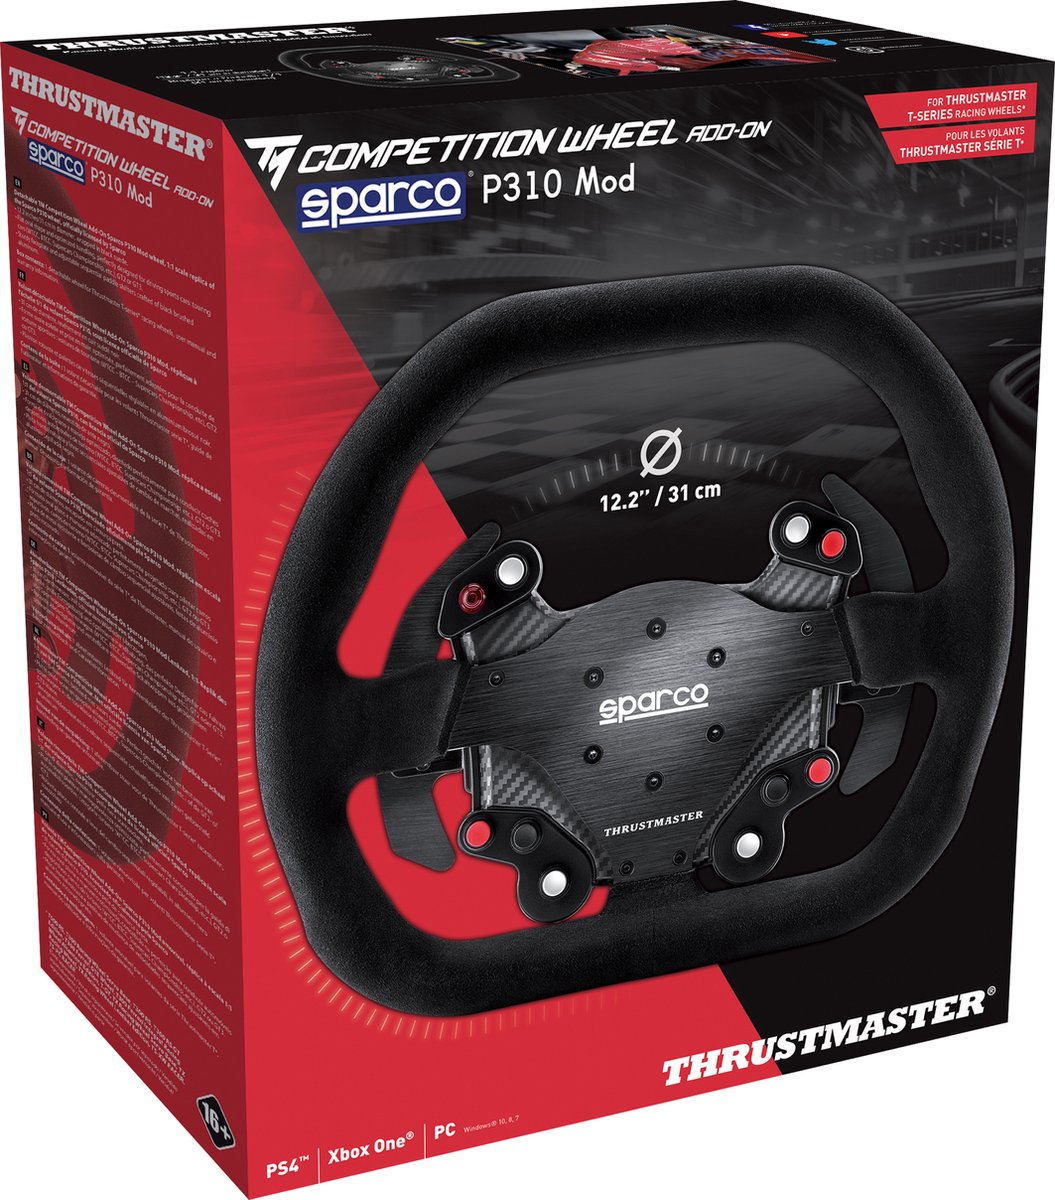 Thrustmaster Wheel Competition add on Sparco P310 Mod